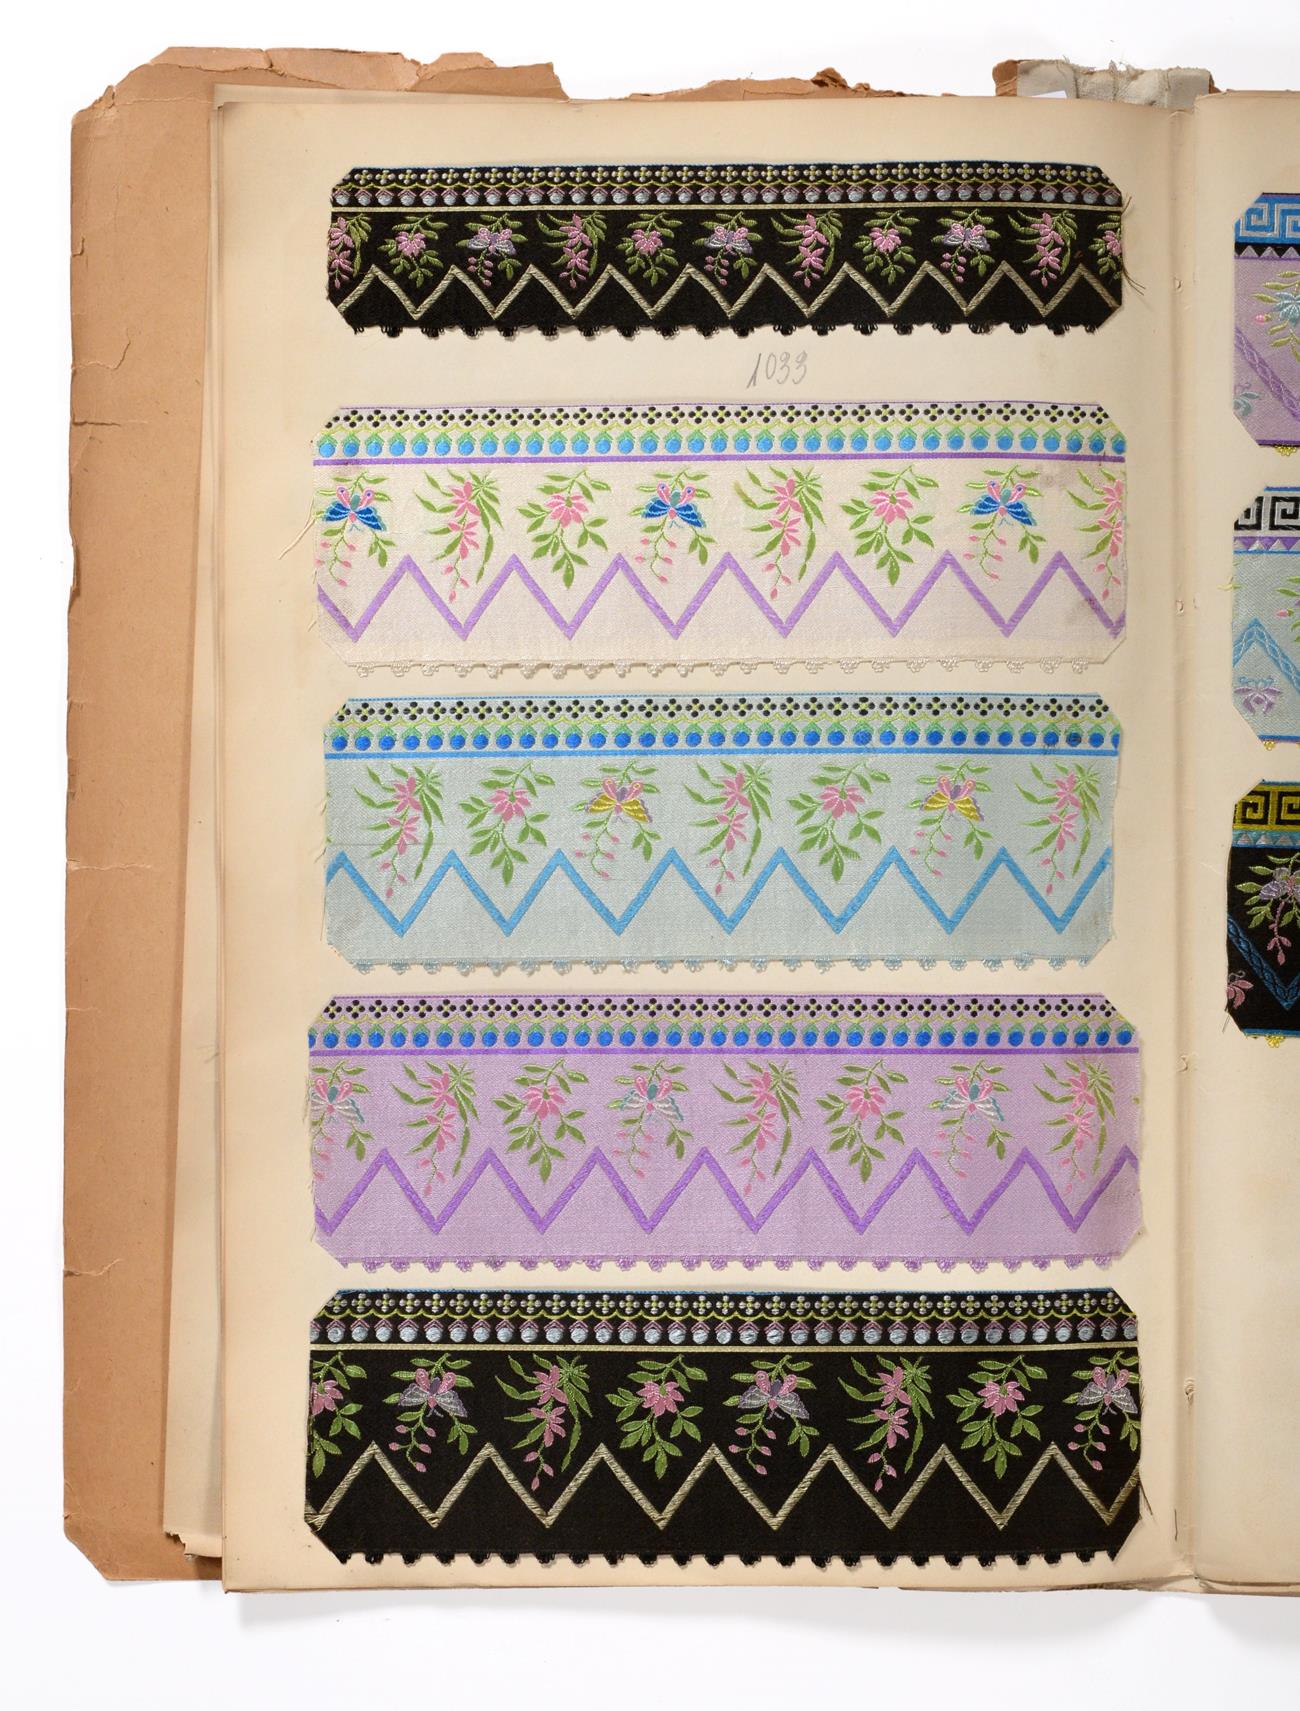 French Silk Ribbon Samples, early 20th century Enclosing decorative woven ribbons mainly in a - Image 2 of 4